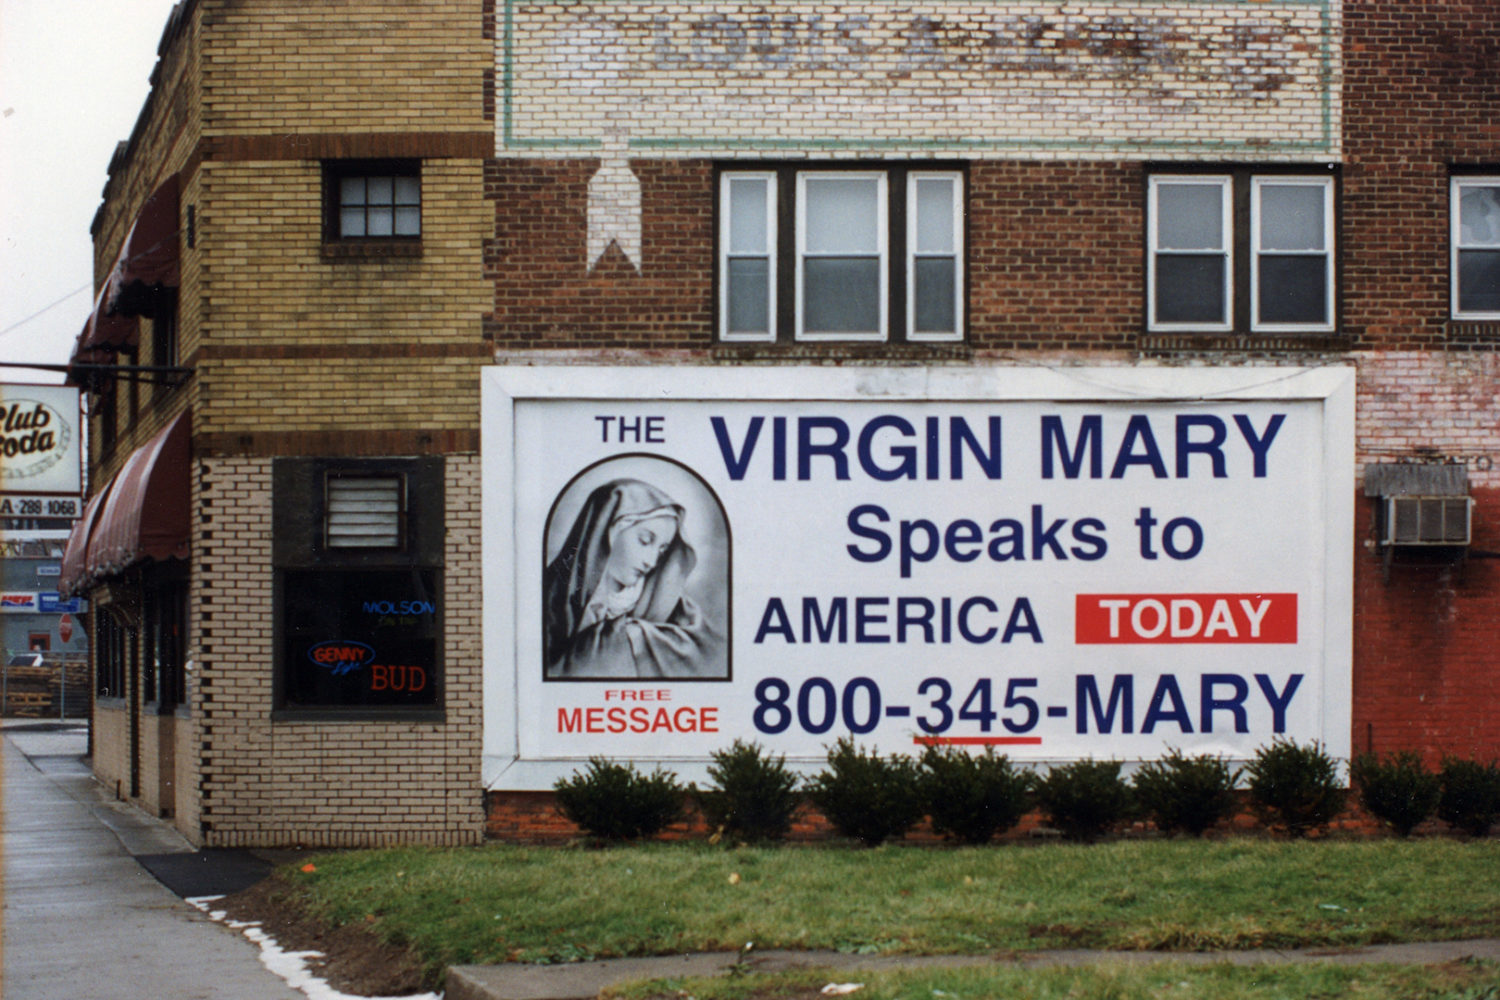 "Virgin Mary Speaks" billboard on Main and Hall Street in Rochester, New York